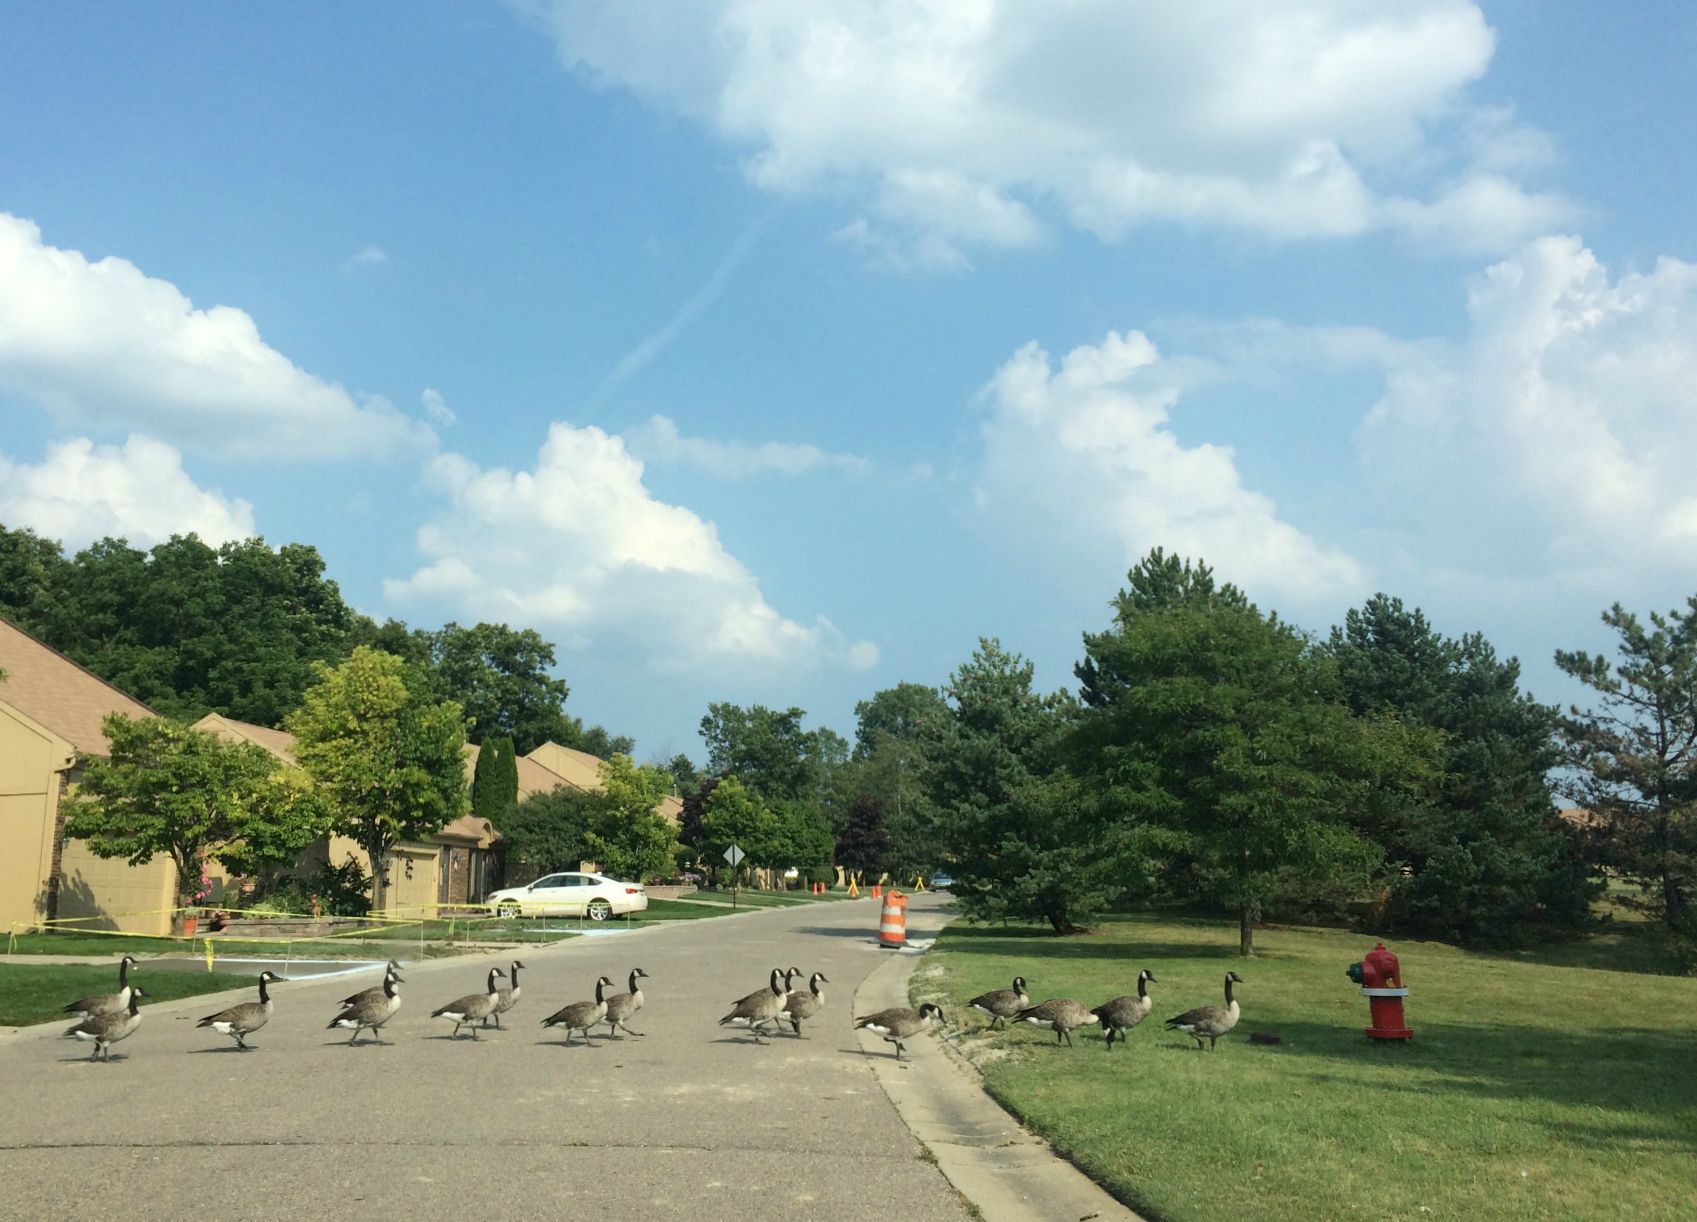 geese crossing the road